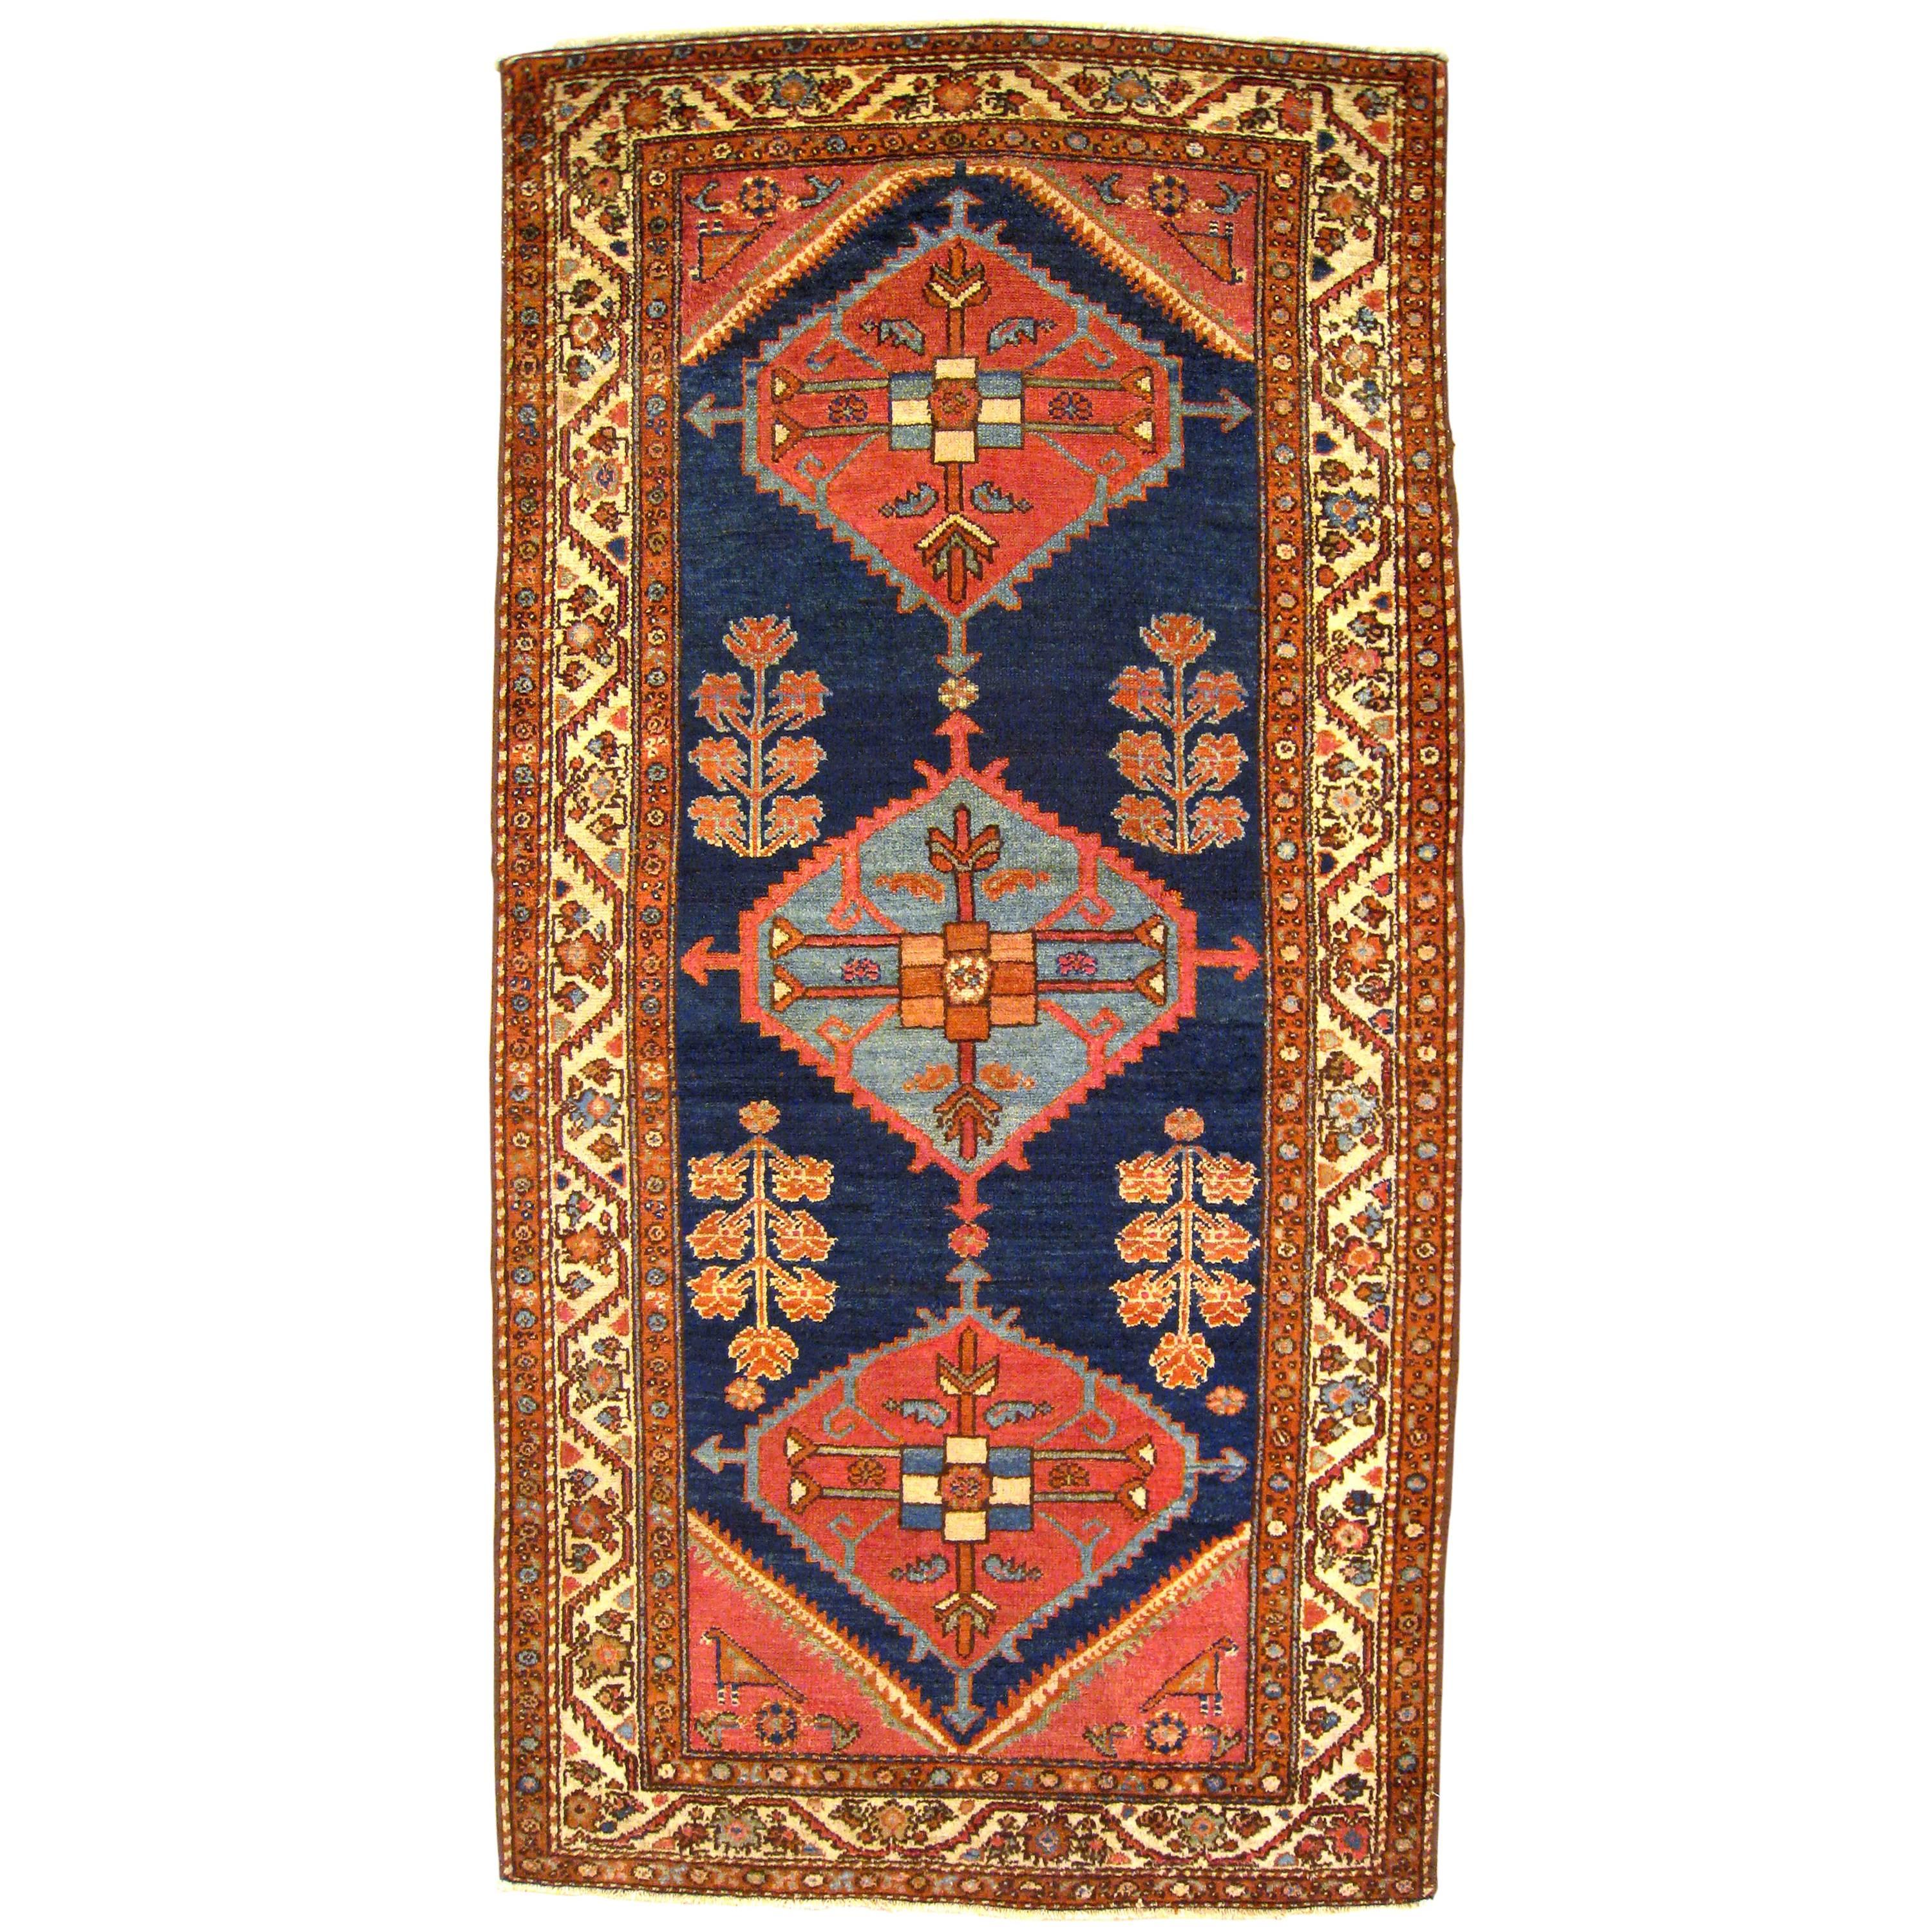 Antique Persian Hamadan Oriental Rug, in Small Runner Size, with Minimal Design